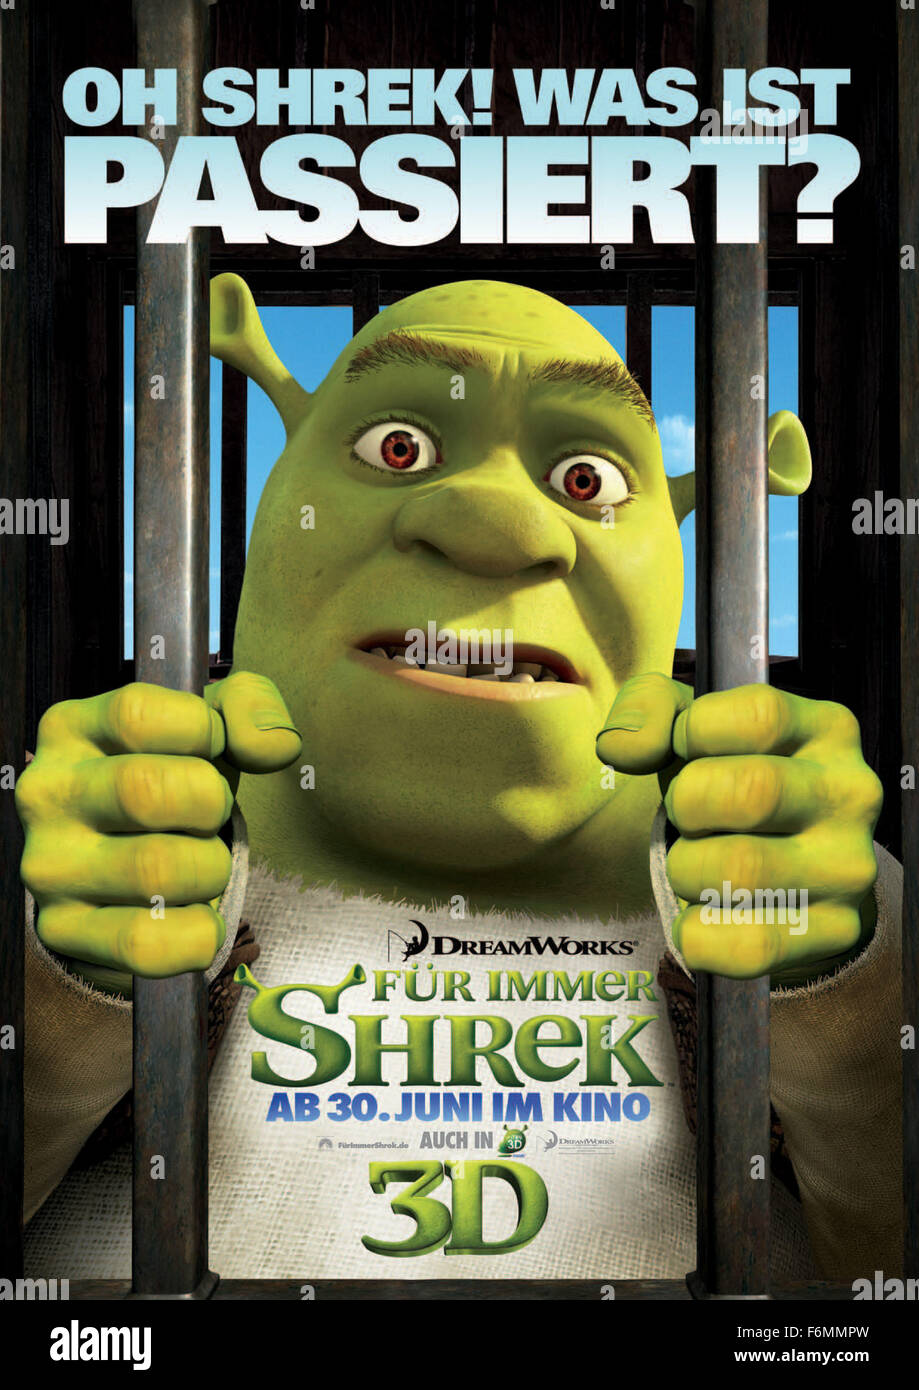 RELEASE DATE: May 21, 2010. MOVIE TITLE: Shrek Forever After. STUDIO: DreamWorks Animation. PLOT: A bored and domesticated Shrek pacts with deal-maker Rumpelstiltskin to get back to feeling like a real ogre again, but when he's duped and sent to a twisted version of Far Far Away -- where Rumpelstiltskin is king, ogres are hunted, and he and Fiona have never met -- he sets out to restore his world and reclaim his true love. PICTURED: . Stock Photo